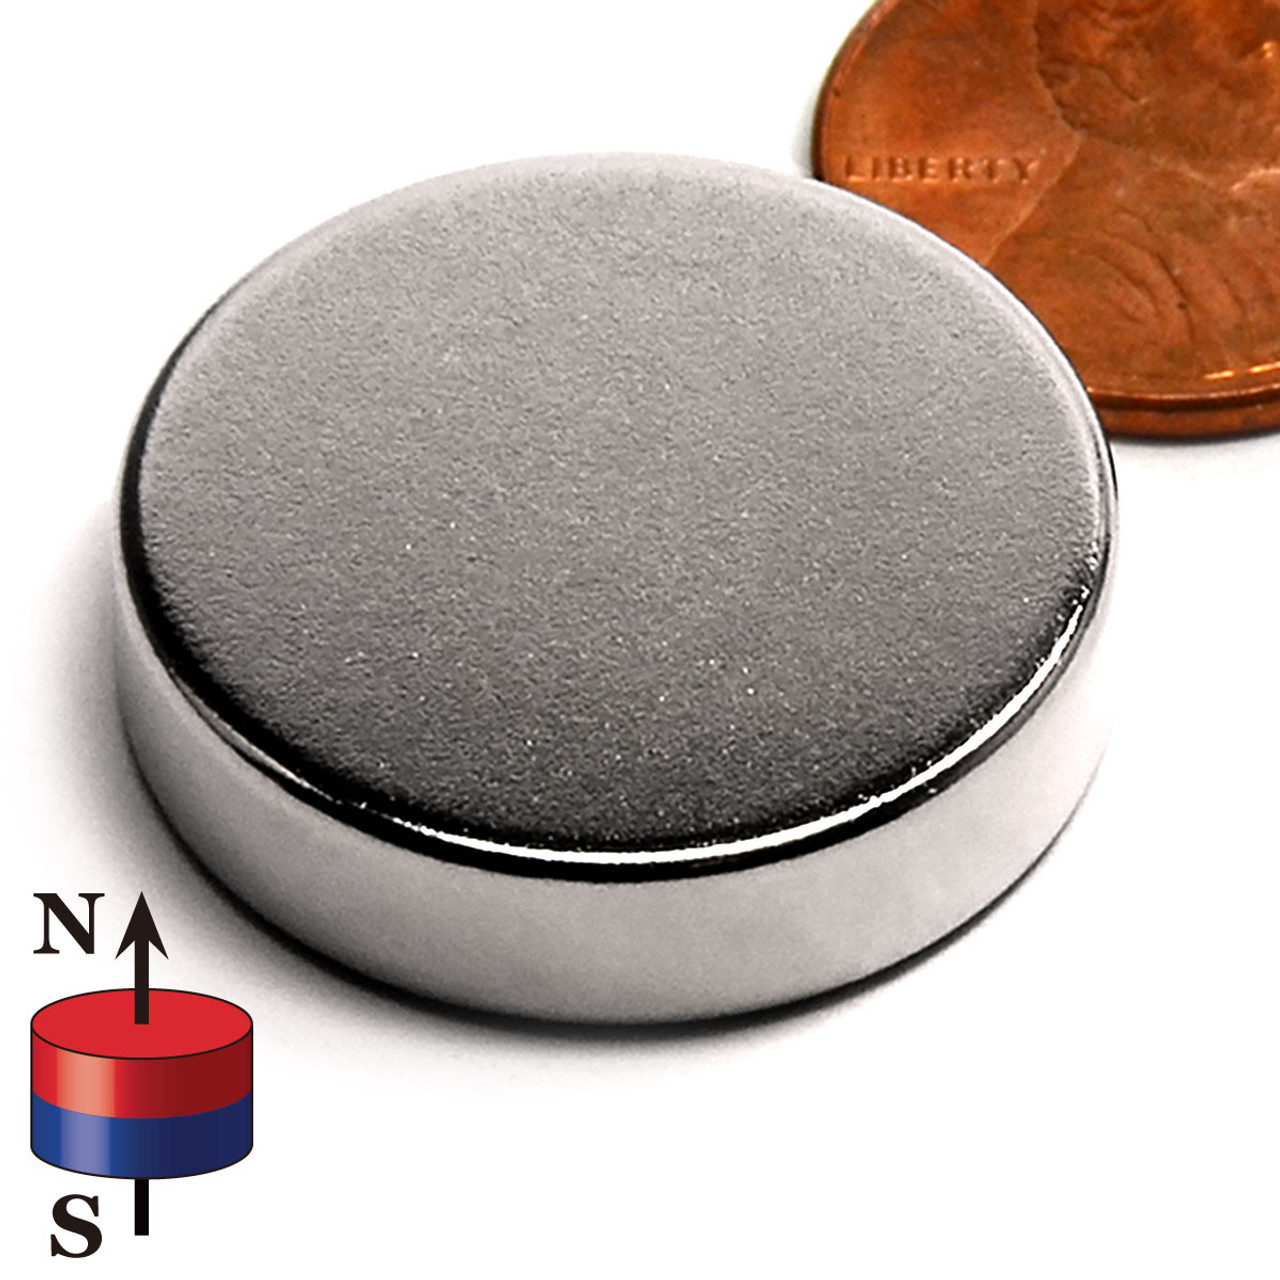 Super strong N52 rare earth magnets 100 NEODYMIUM magnets 1/2" x 3/8" x 1/4"